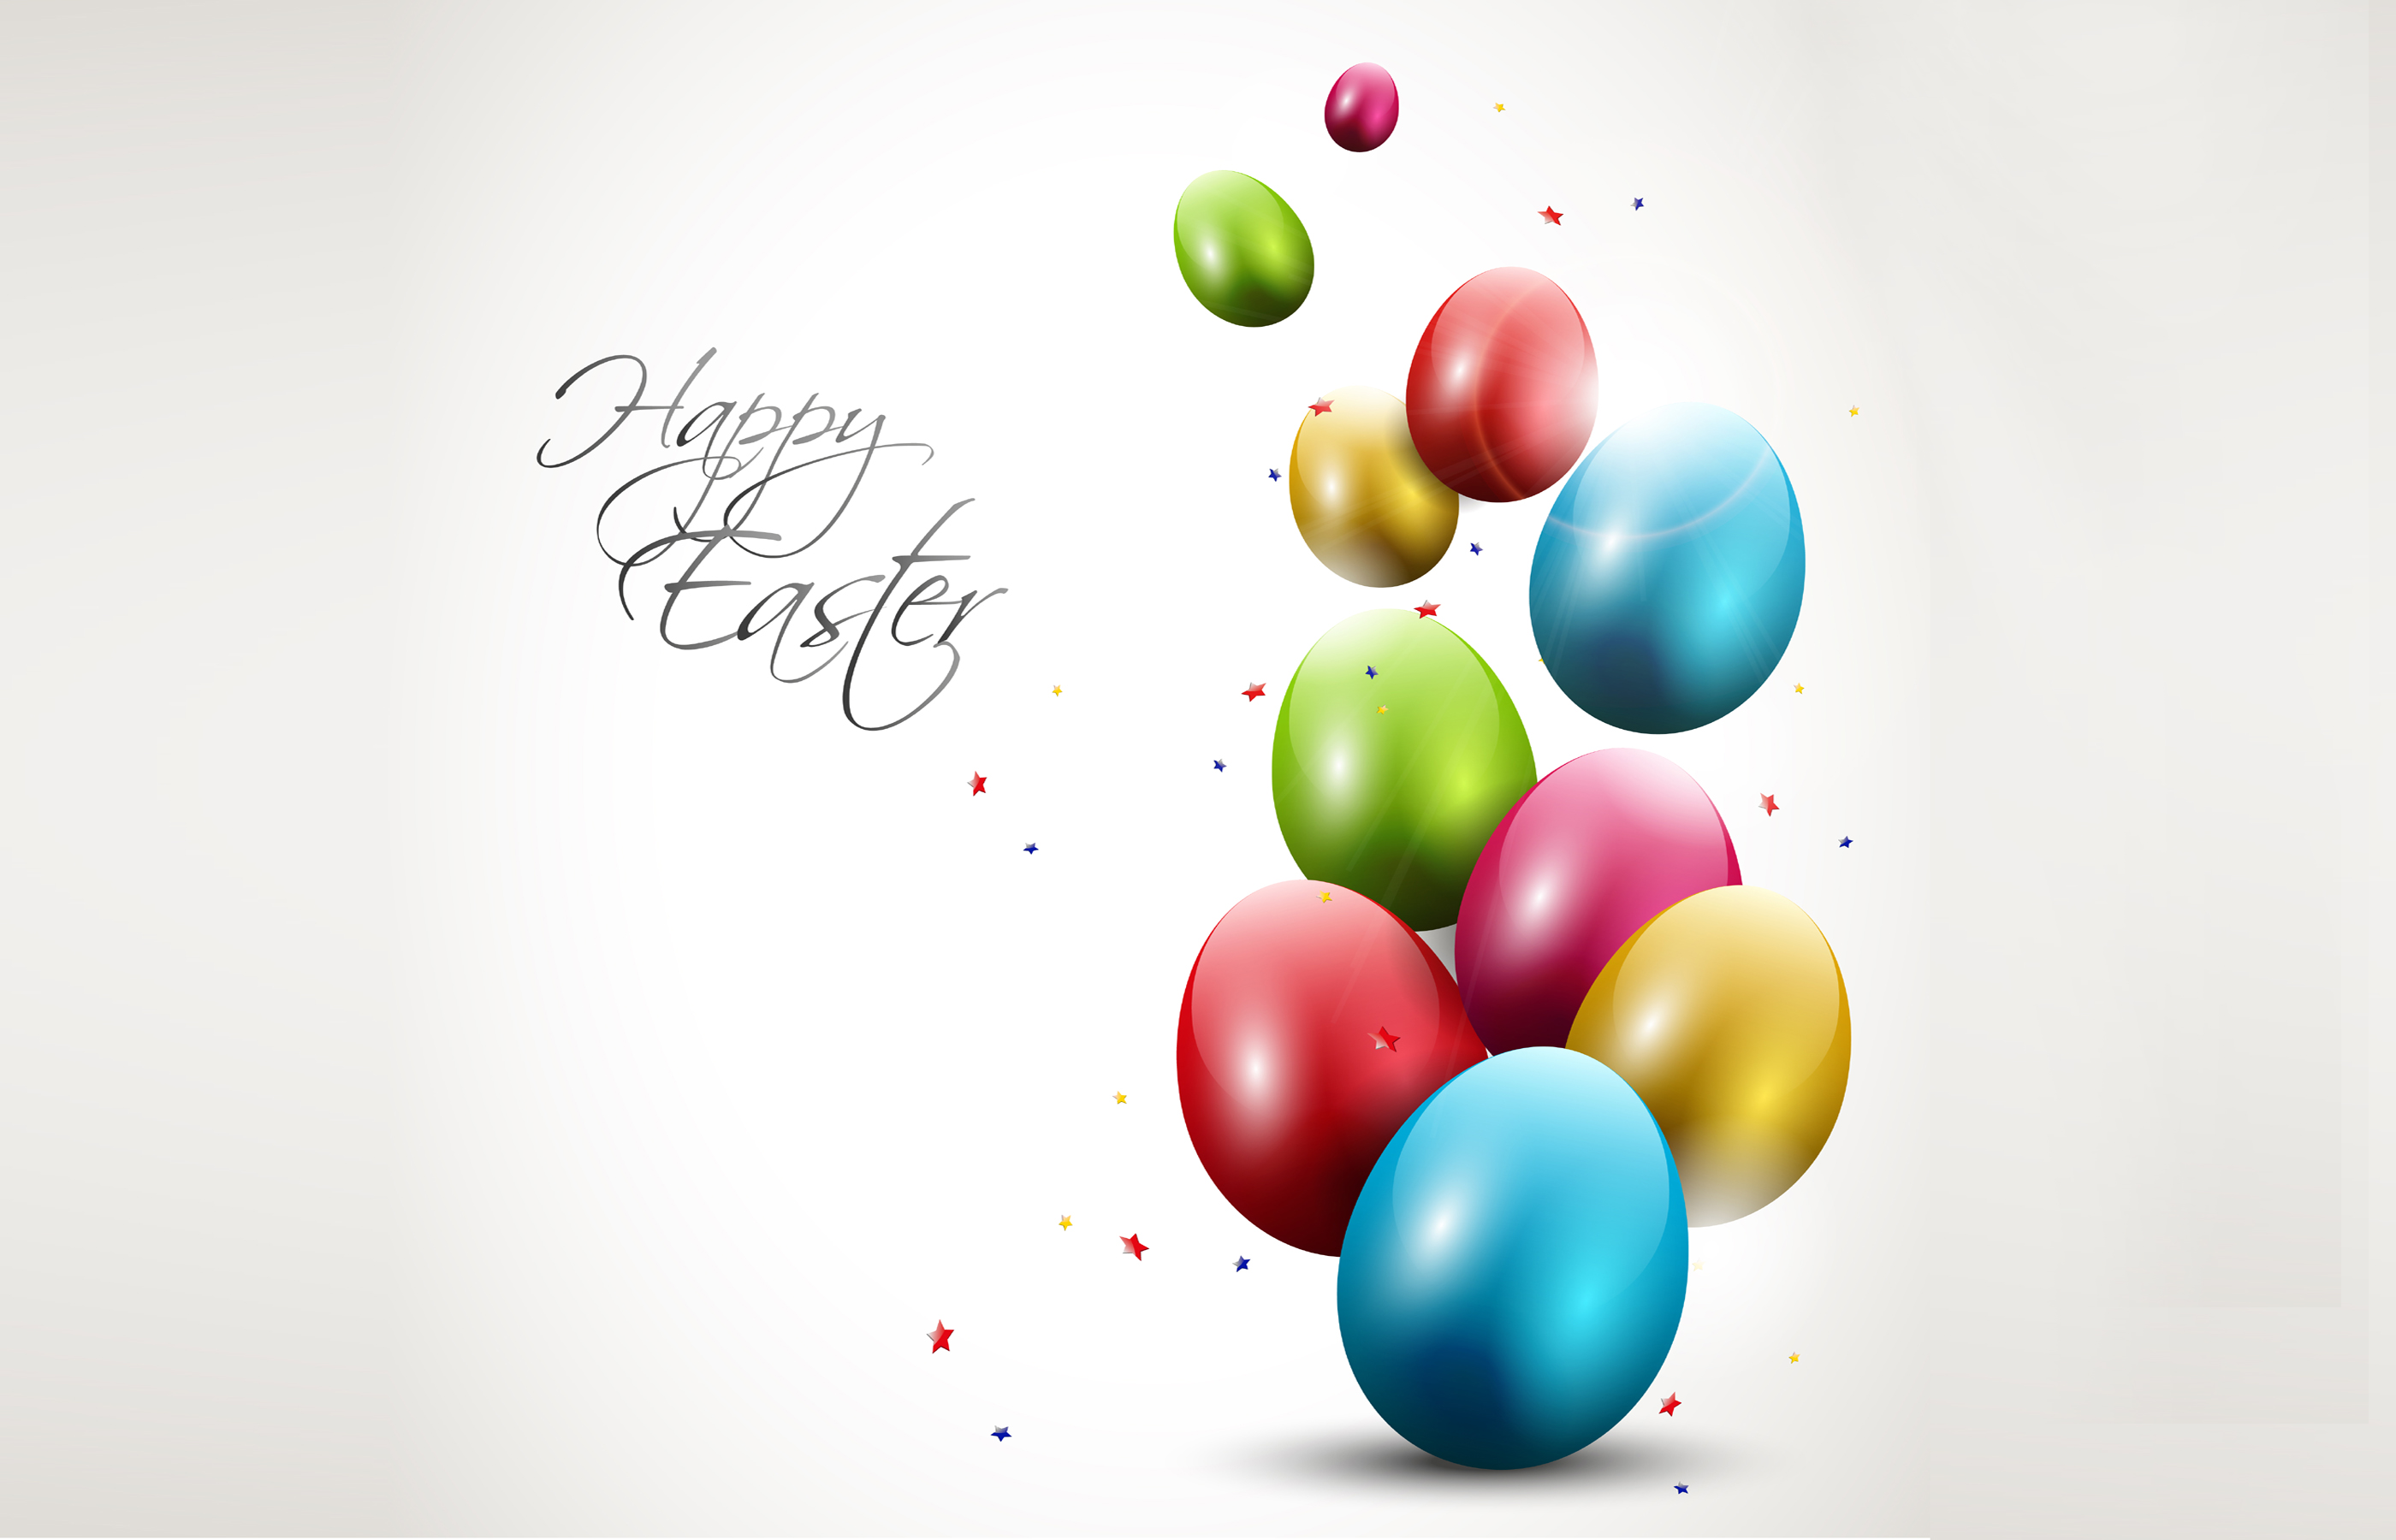 Happy Easter Images for Desktop | HD Wallpapers, Backgrounds ...